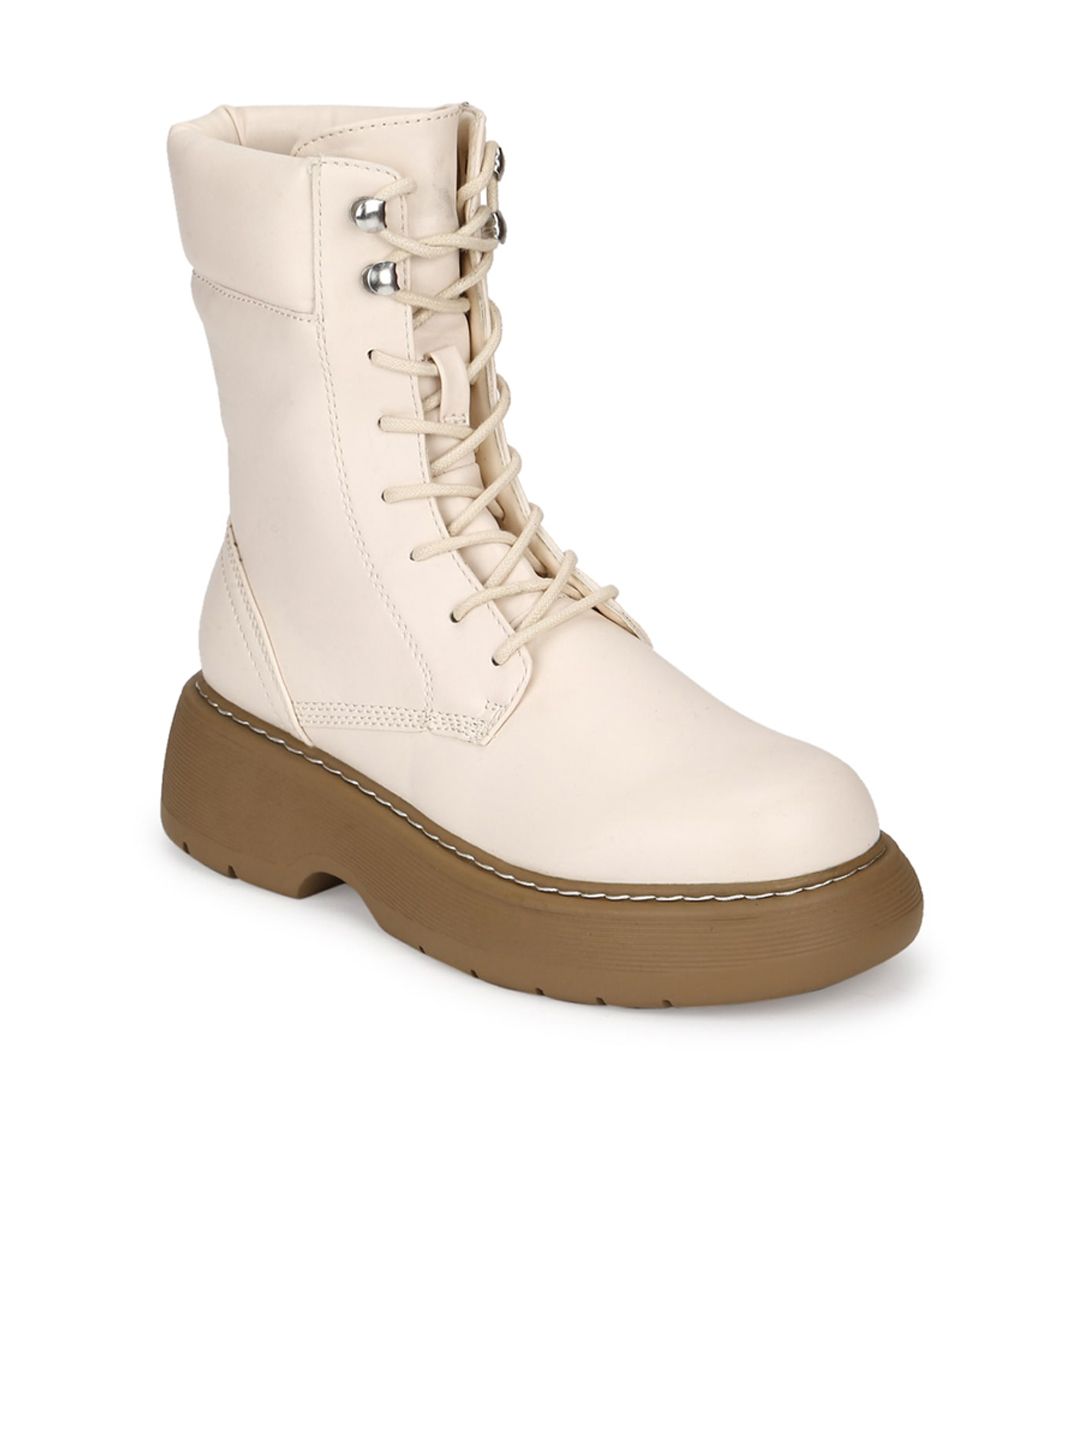 Truffle Collection Beige PU Comfort Heeled Boots Price in India